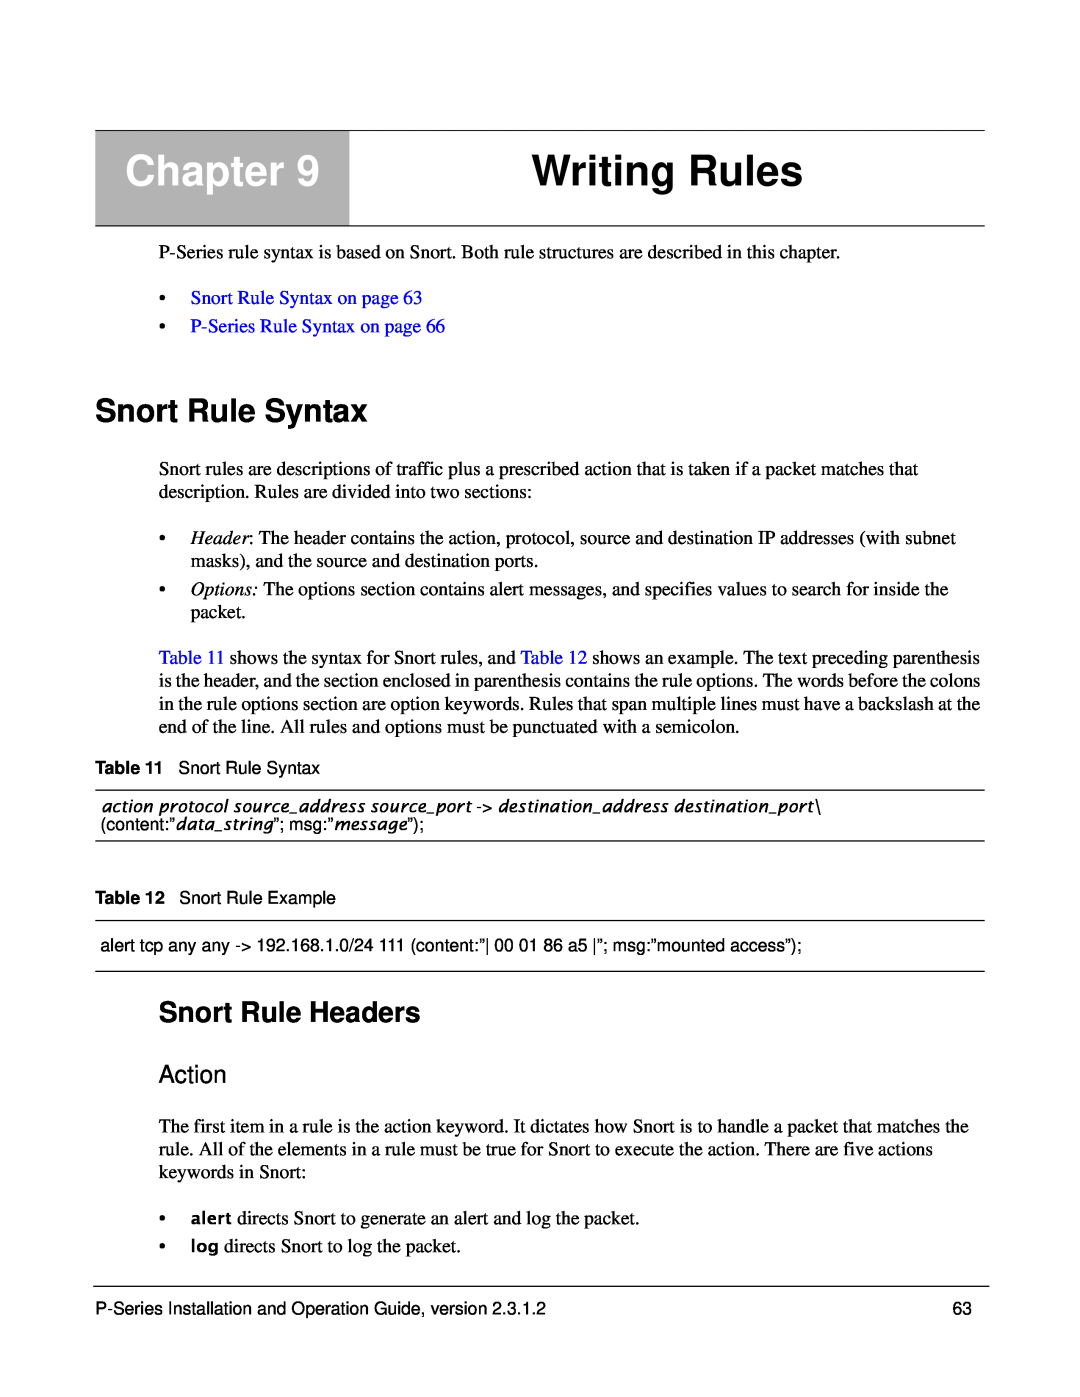 Force10 Networks 100-00055-01 manual Writing Rules, Snort Rule Syntax, Snort Rule Headers, Action, Chapter 